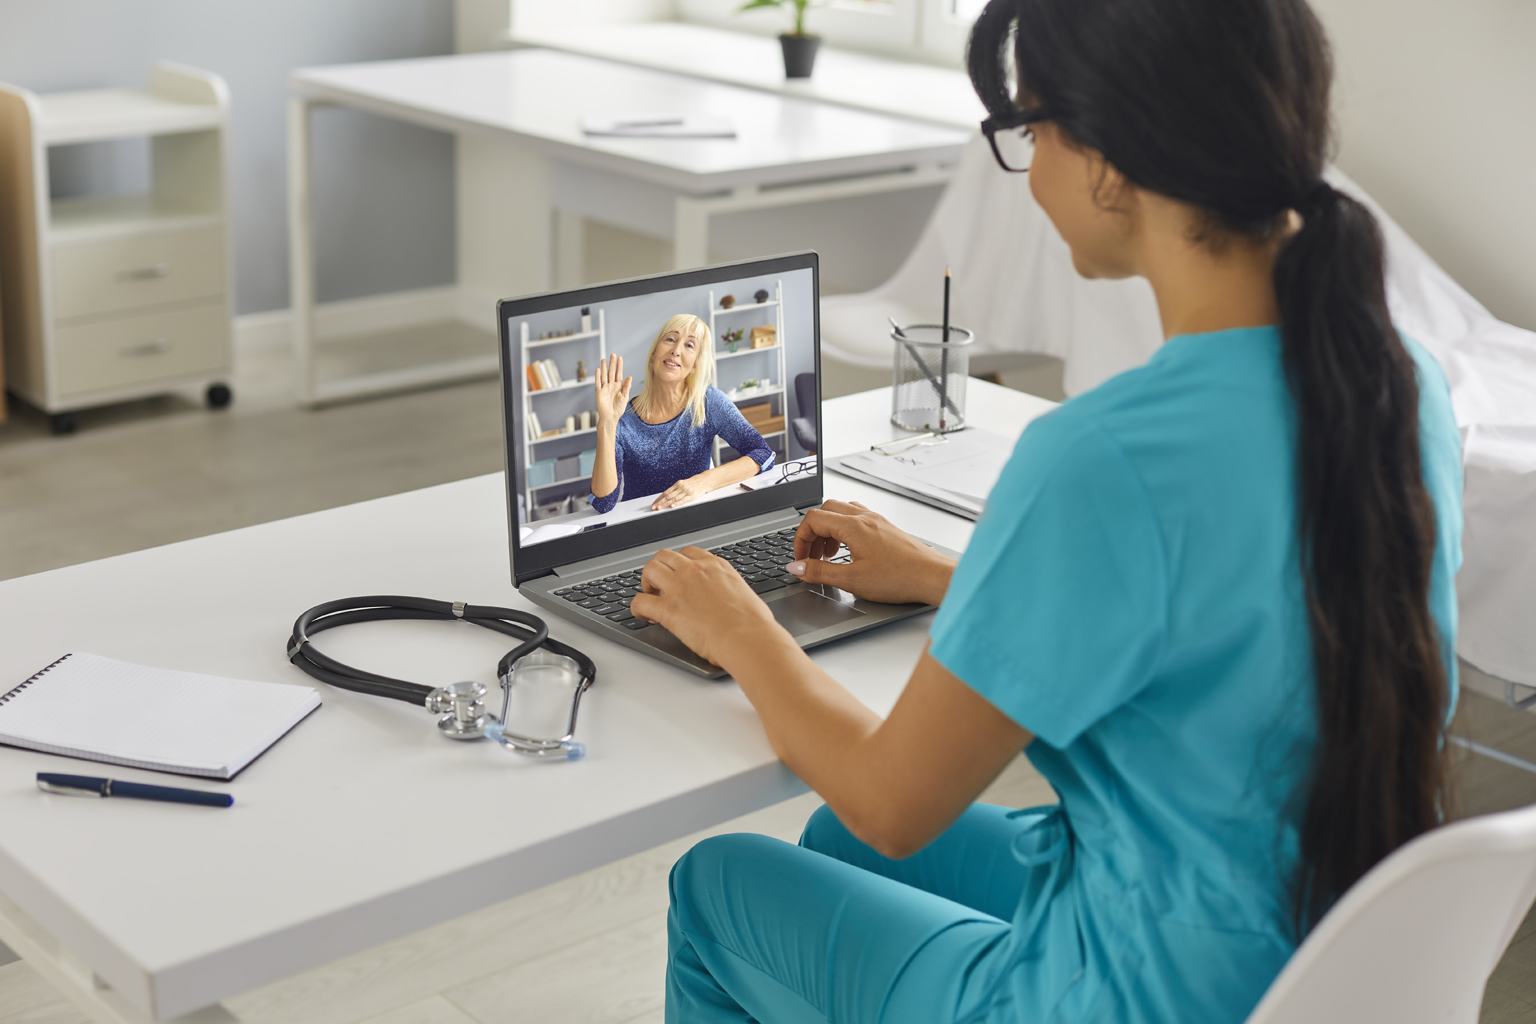 Healthcare worker sitting at desk on laptop with patient, telemedicine/telehealth